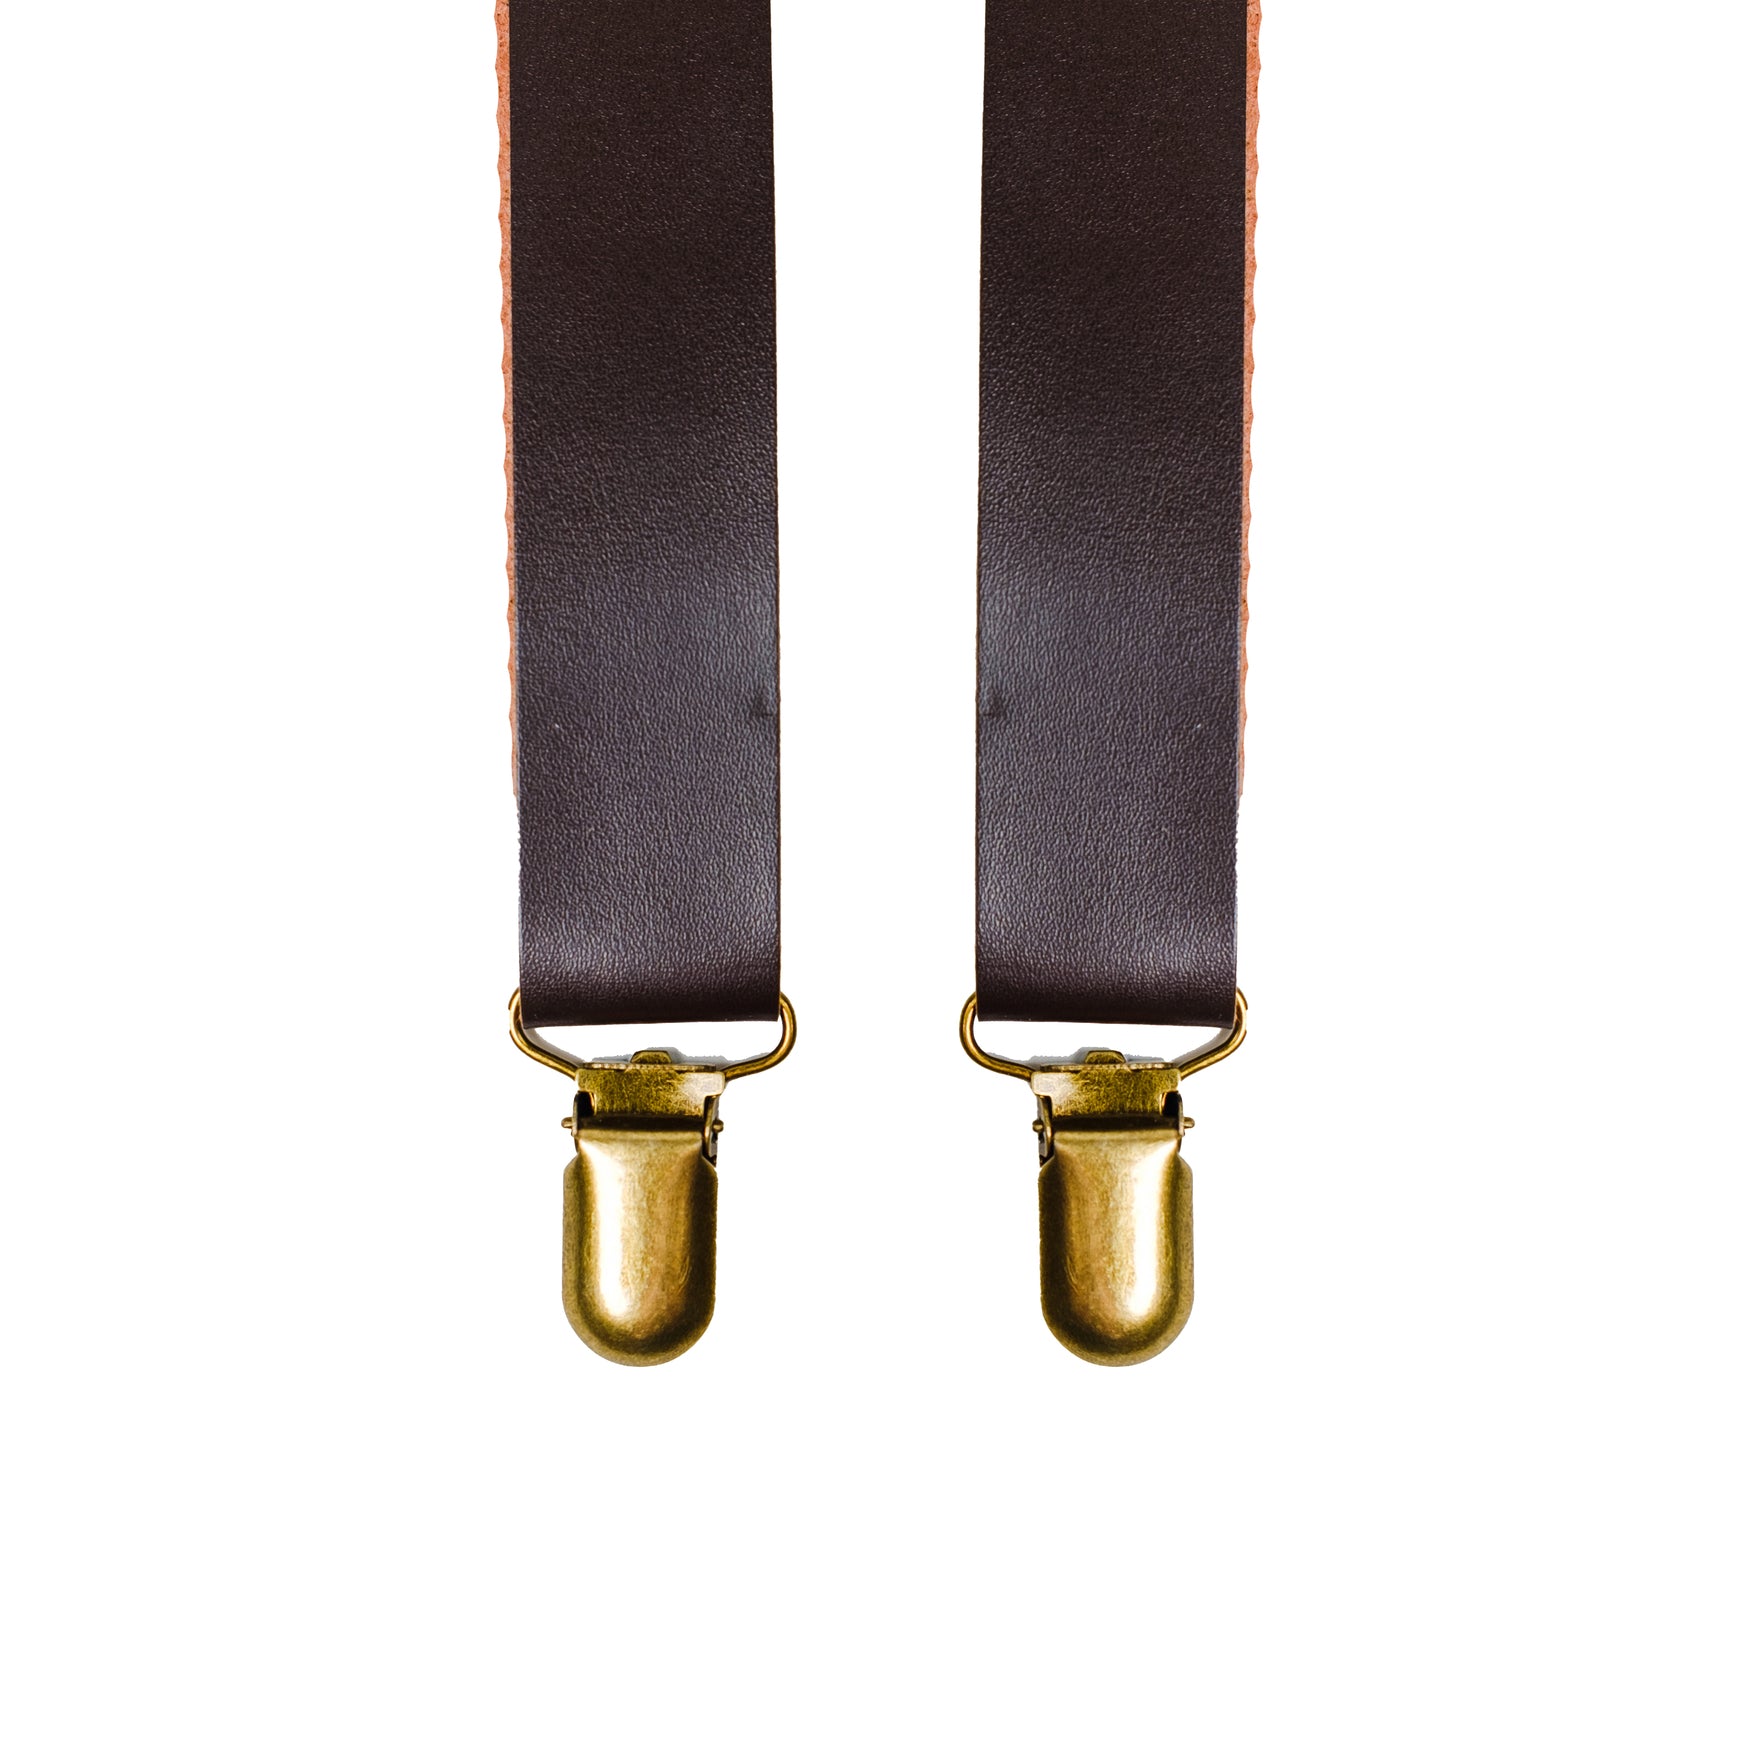 Chokore Y-shaped PU Leather Suspenders with Finger Clips (Chocolate Brown)